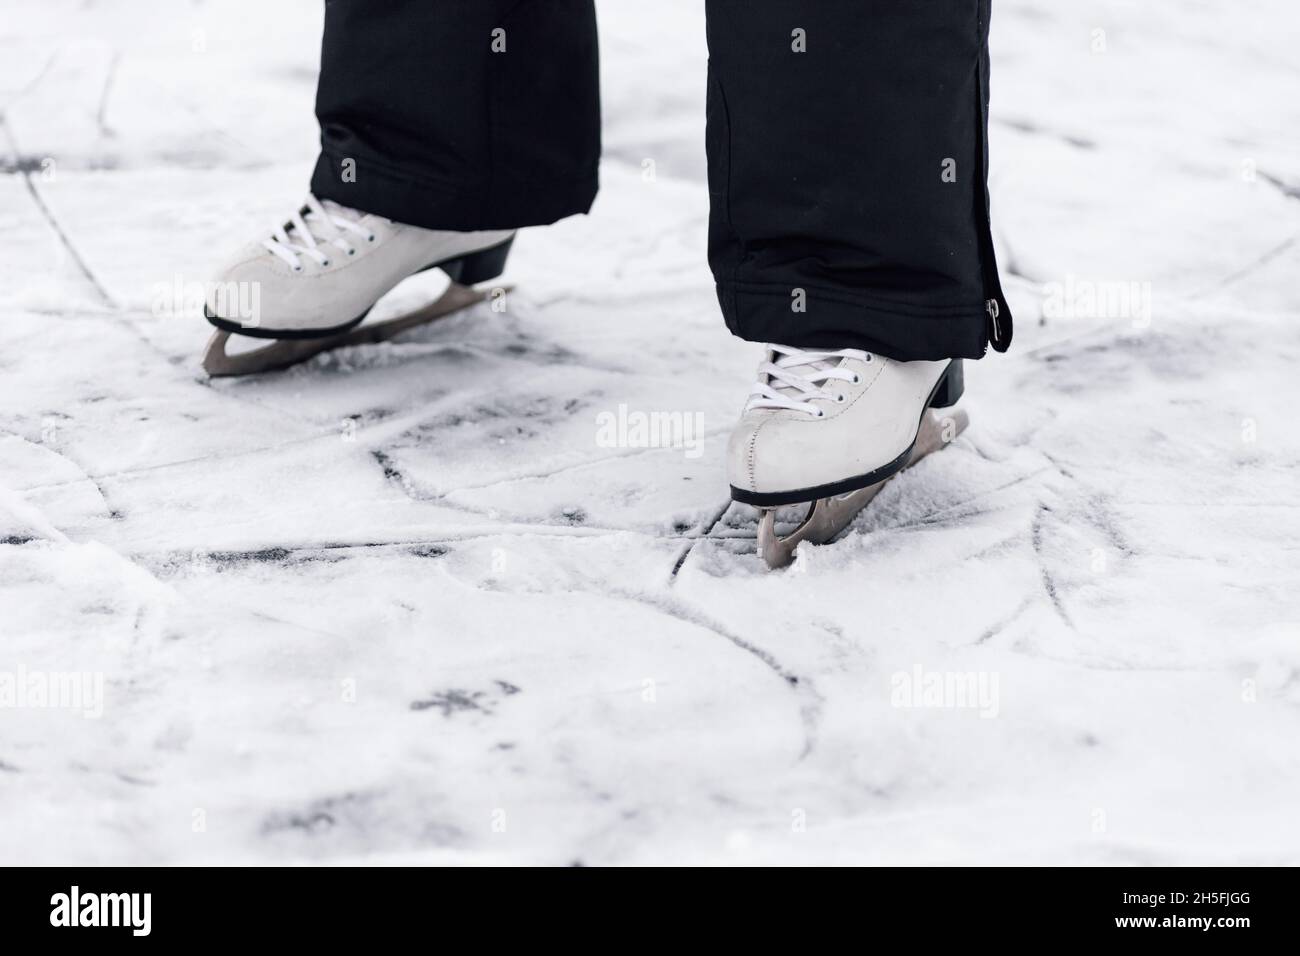 Figure skating skates. Close-up of man's feet standing on skates on ice of a frozen lake Stock Photo